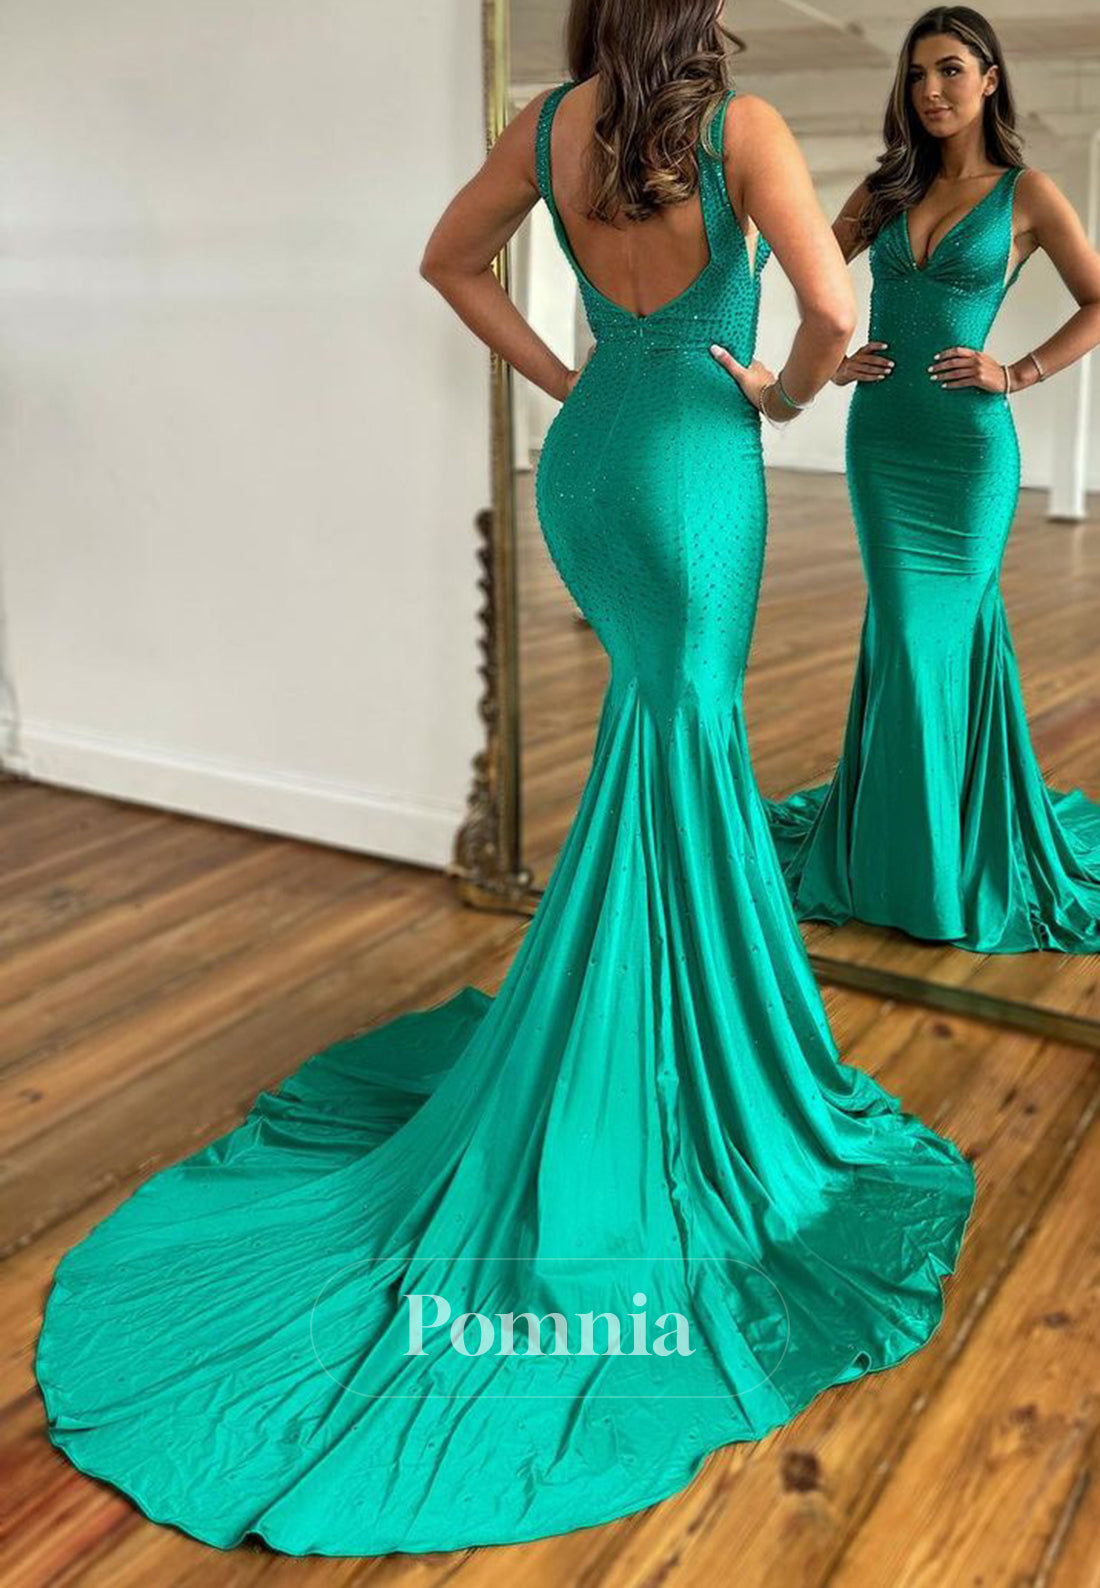 P2097 - Mermaid V-Neck Pleated Rhinestone Long Prom Party Formal Dress with Train